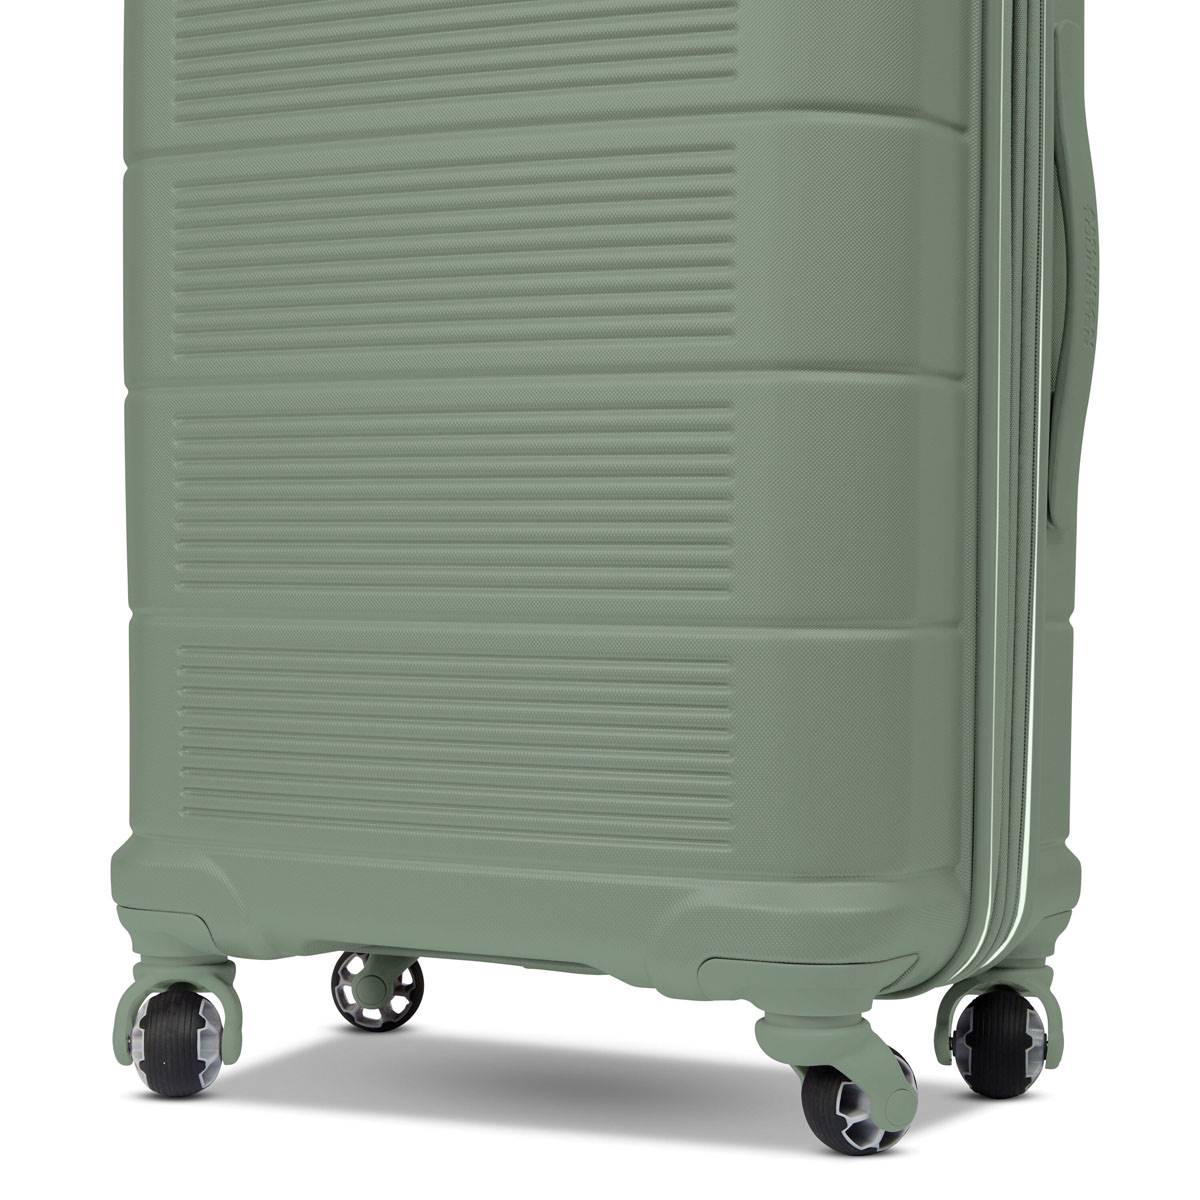 American Tourister Stratum 2.0 24in. Spinner Luggage